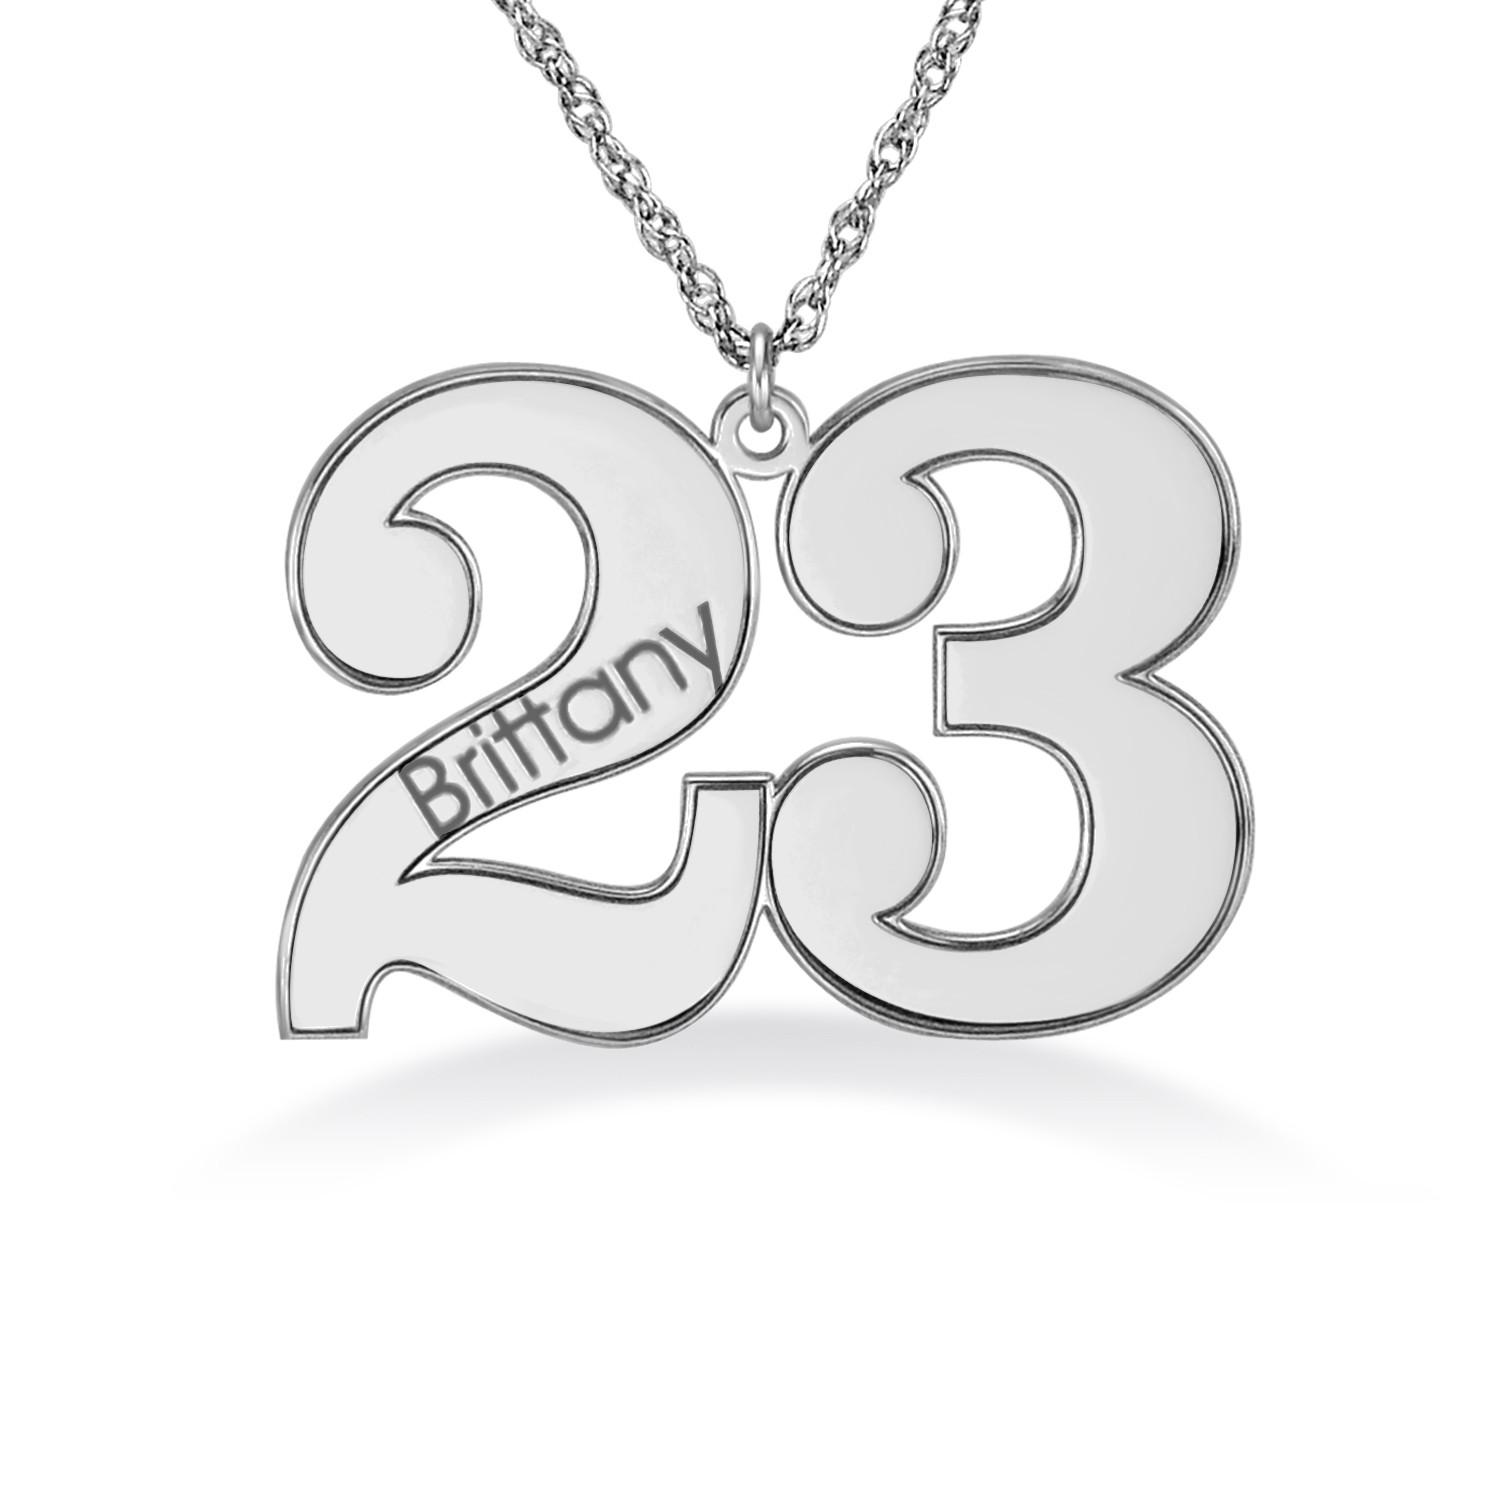 LAOFU Personalized 925 Sterling Silver Combine Number Pendant Necklace Custom Made Number 